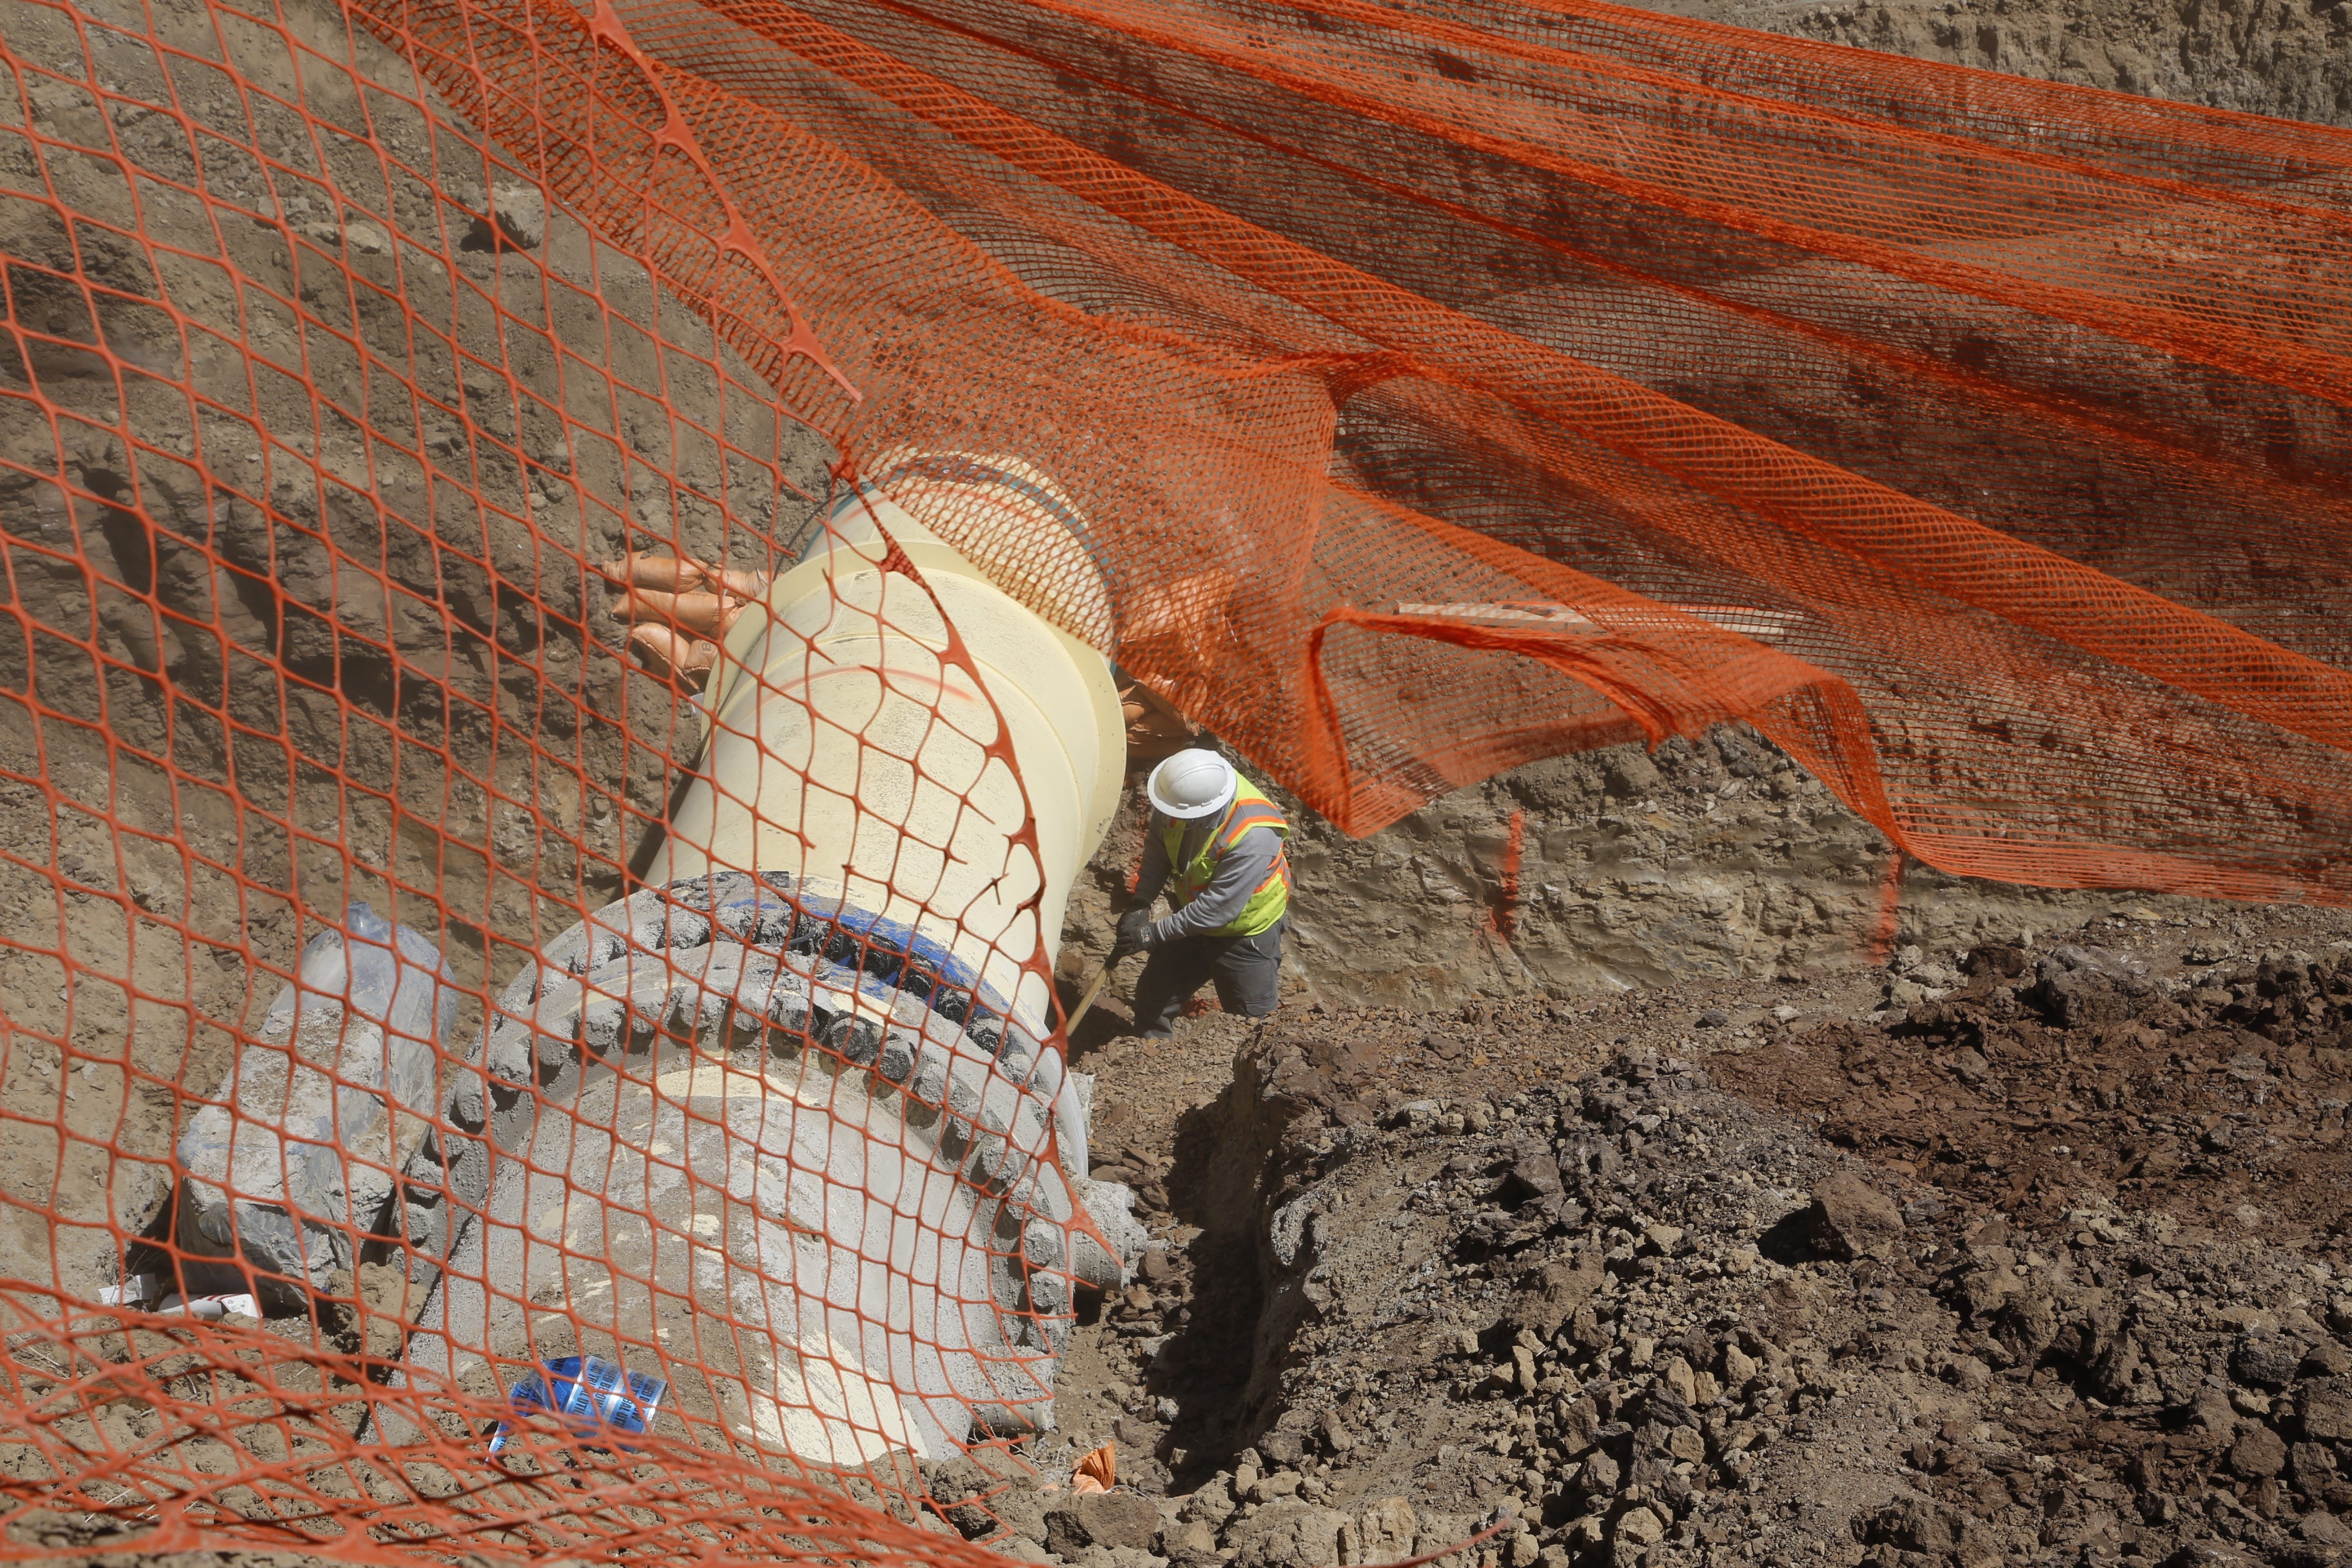 A construction worker shovels dirt from underneath a thrust block as part of the Navajo-Gallup Water Supply Project on April 15 in Sheep Springs.